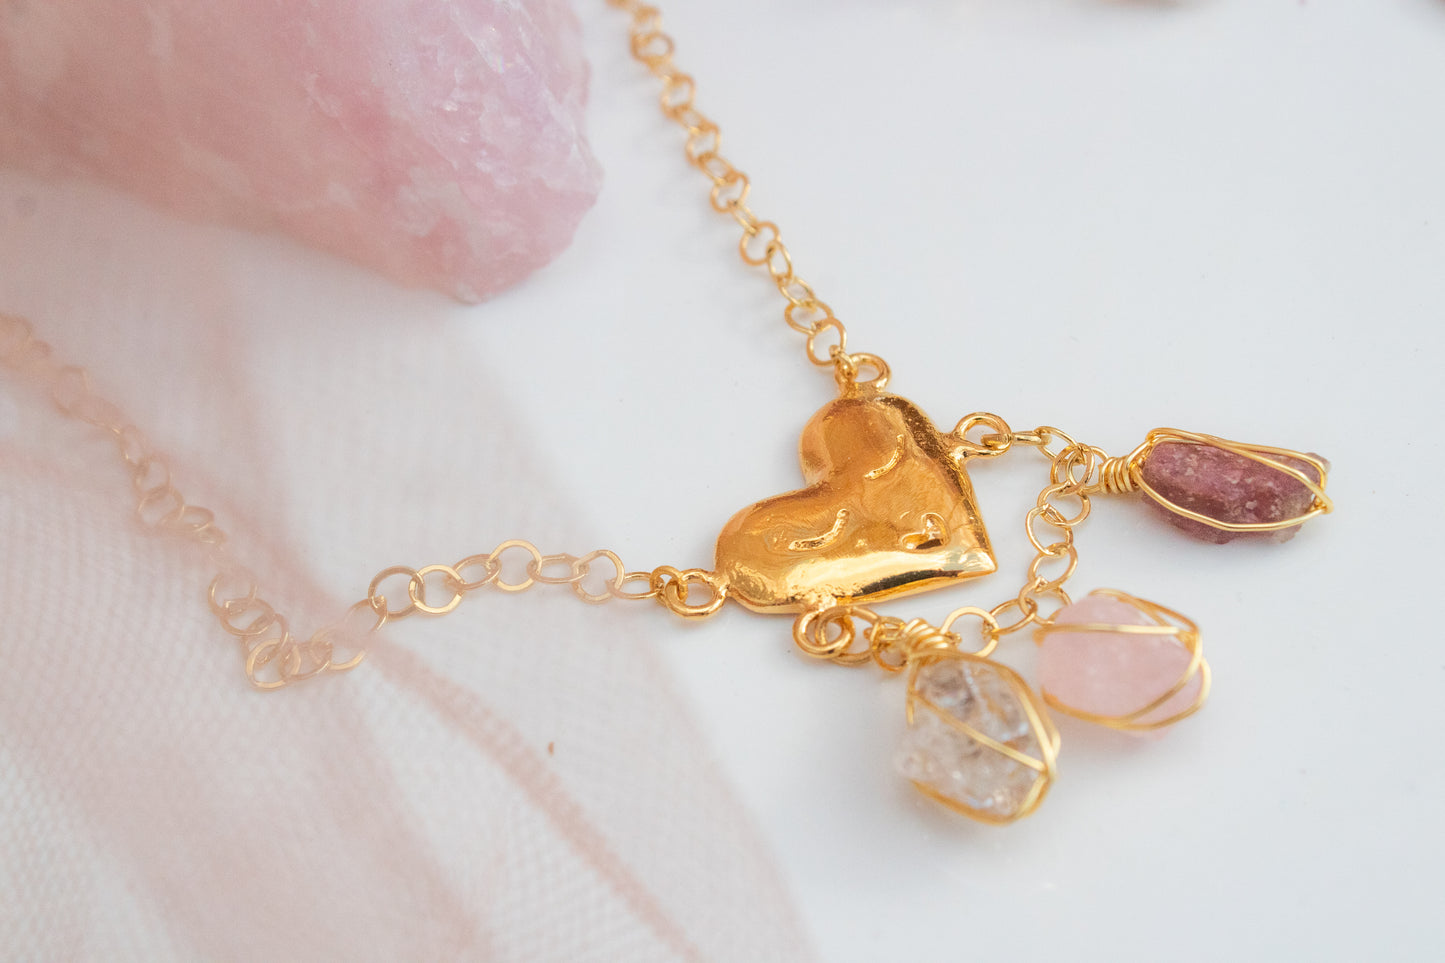 Cuore. Necklace with herkimer quartz, morganite and pink tourmaline